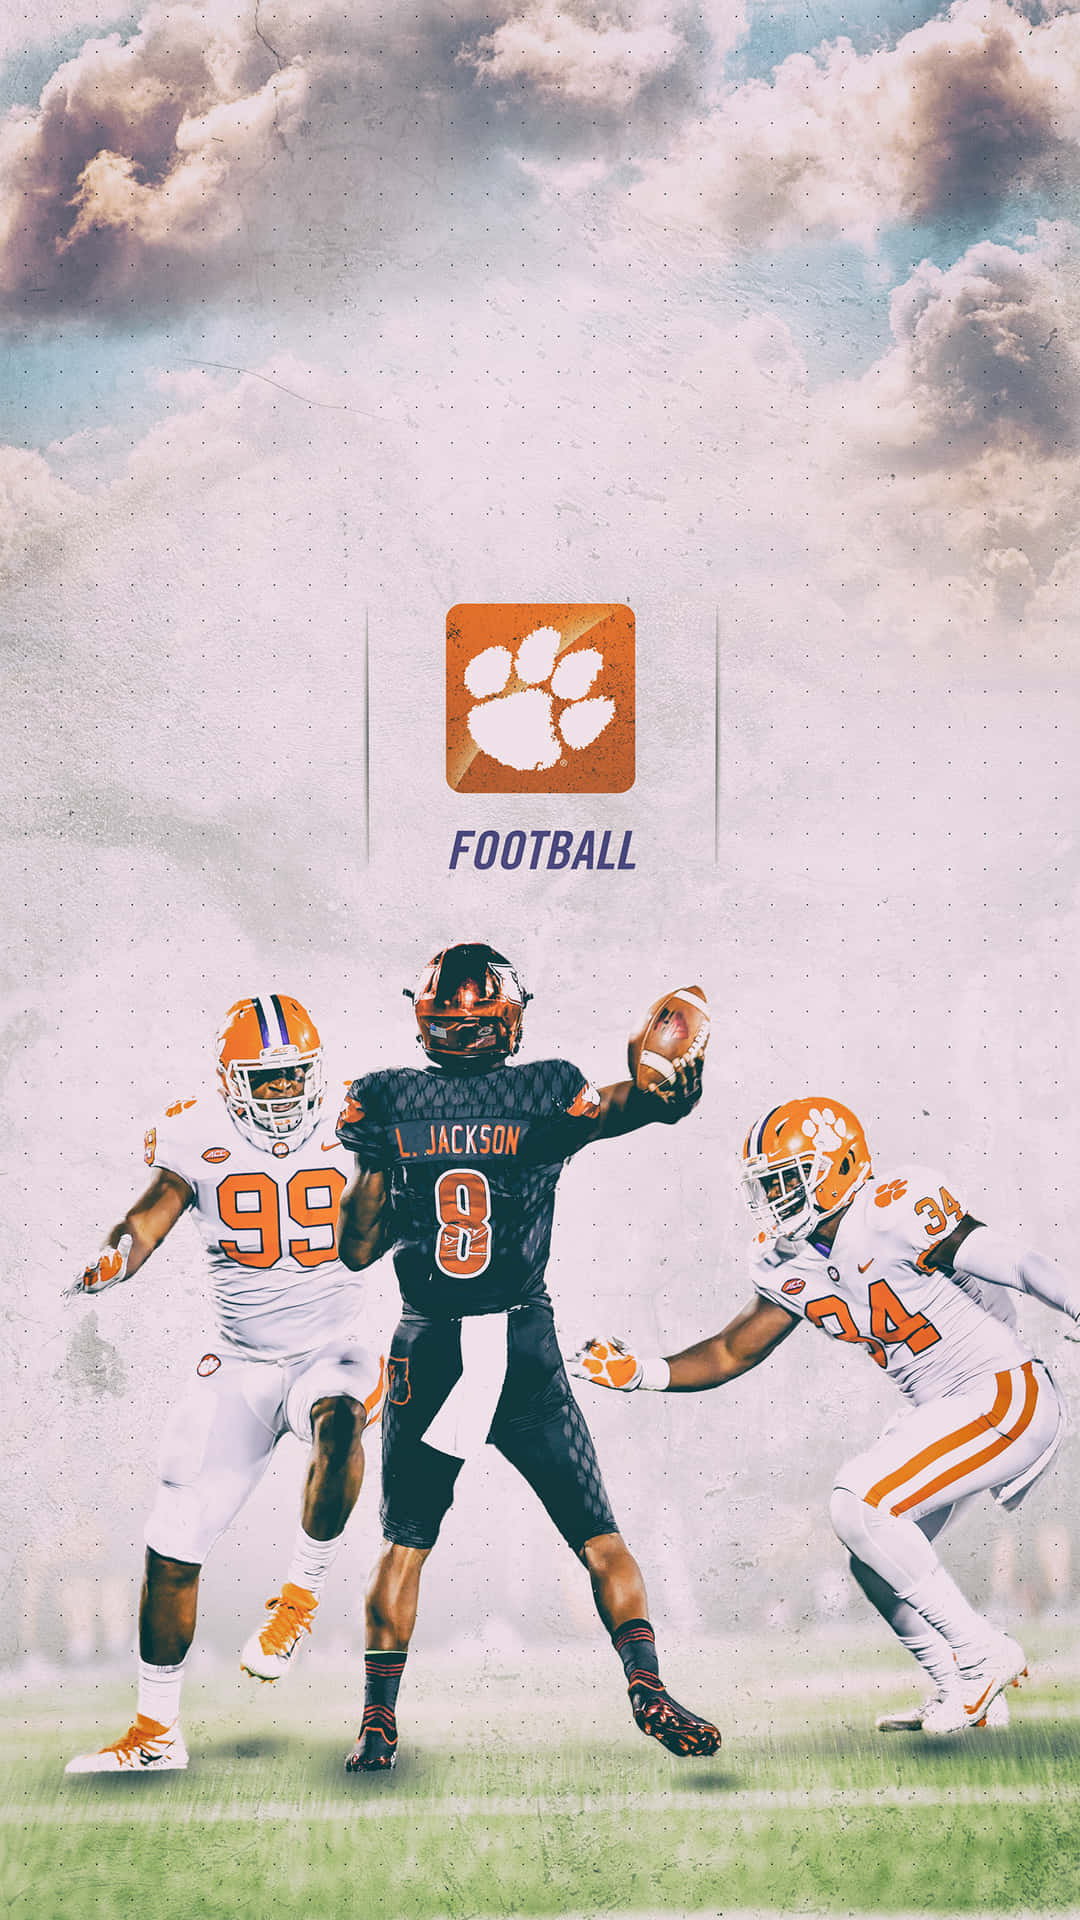 Get the most from your Clemson experience with the Clemson iPhone. Wallpaper